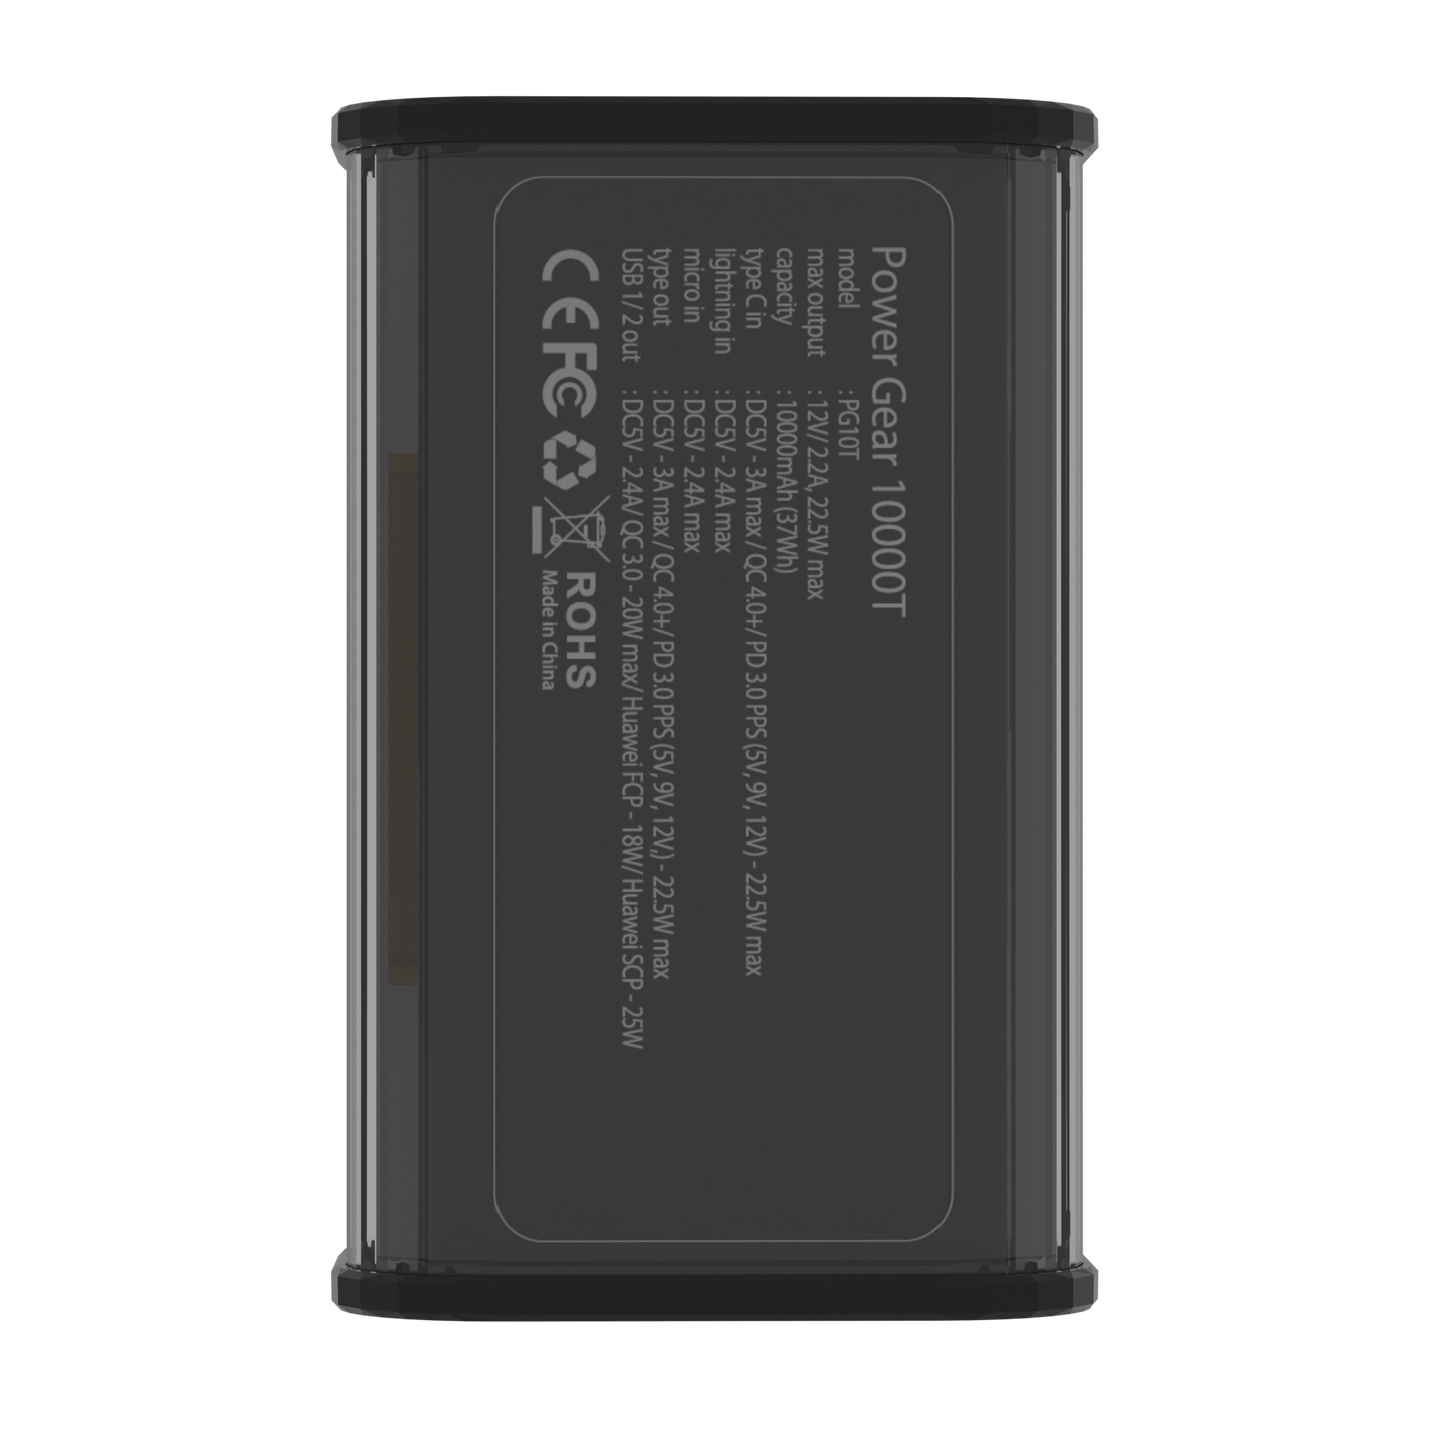 Power Gear 10000T Transparency Portable Battery